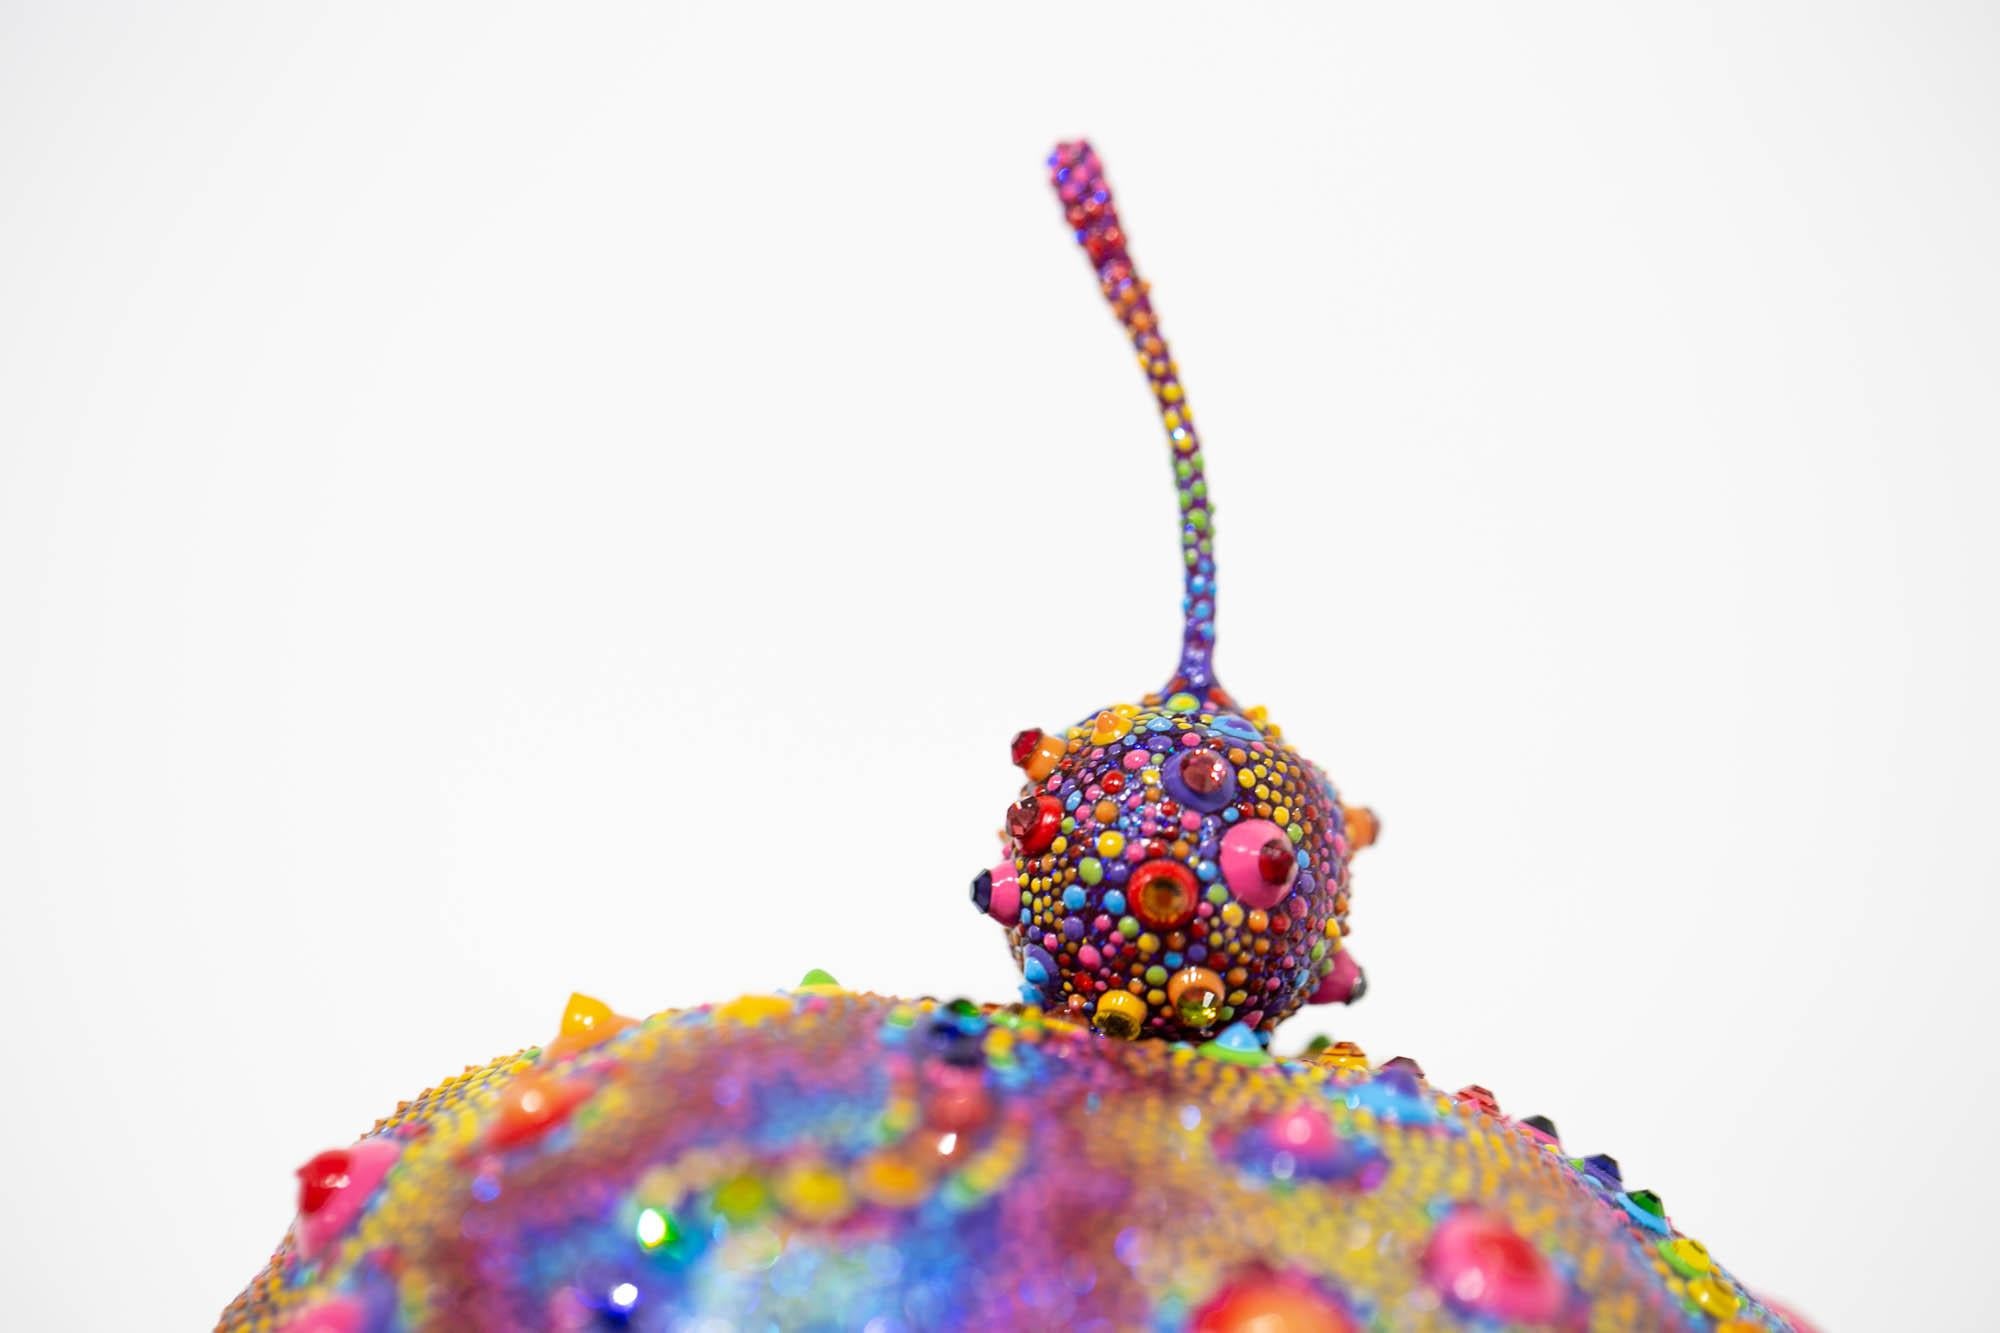 Candy Urchin Skull - Contemporary Sculpture by PJ Linden